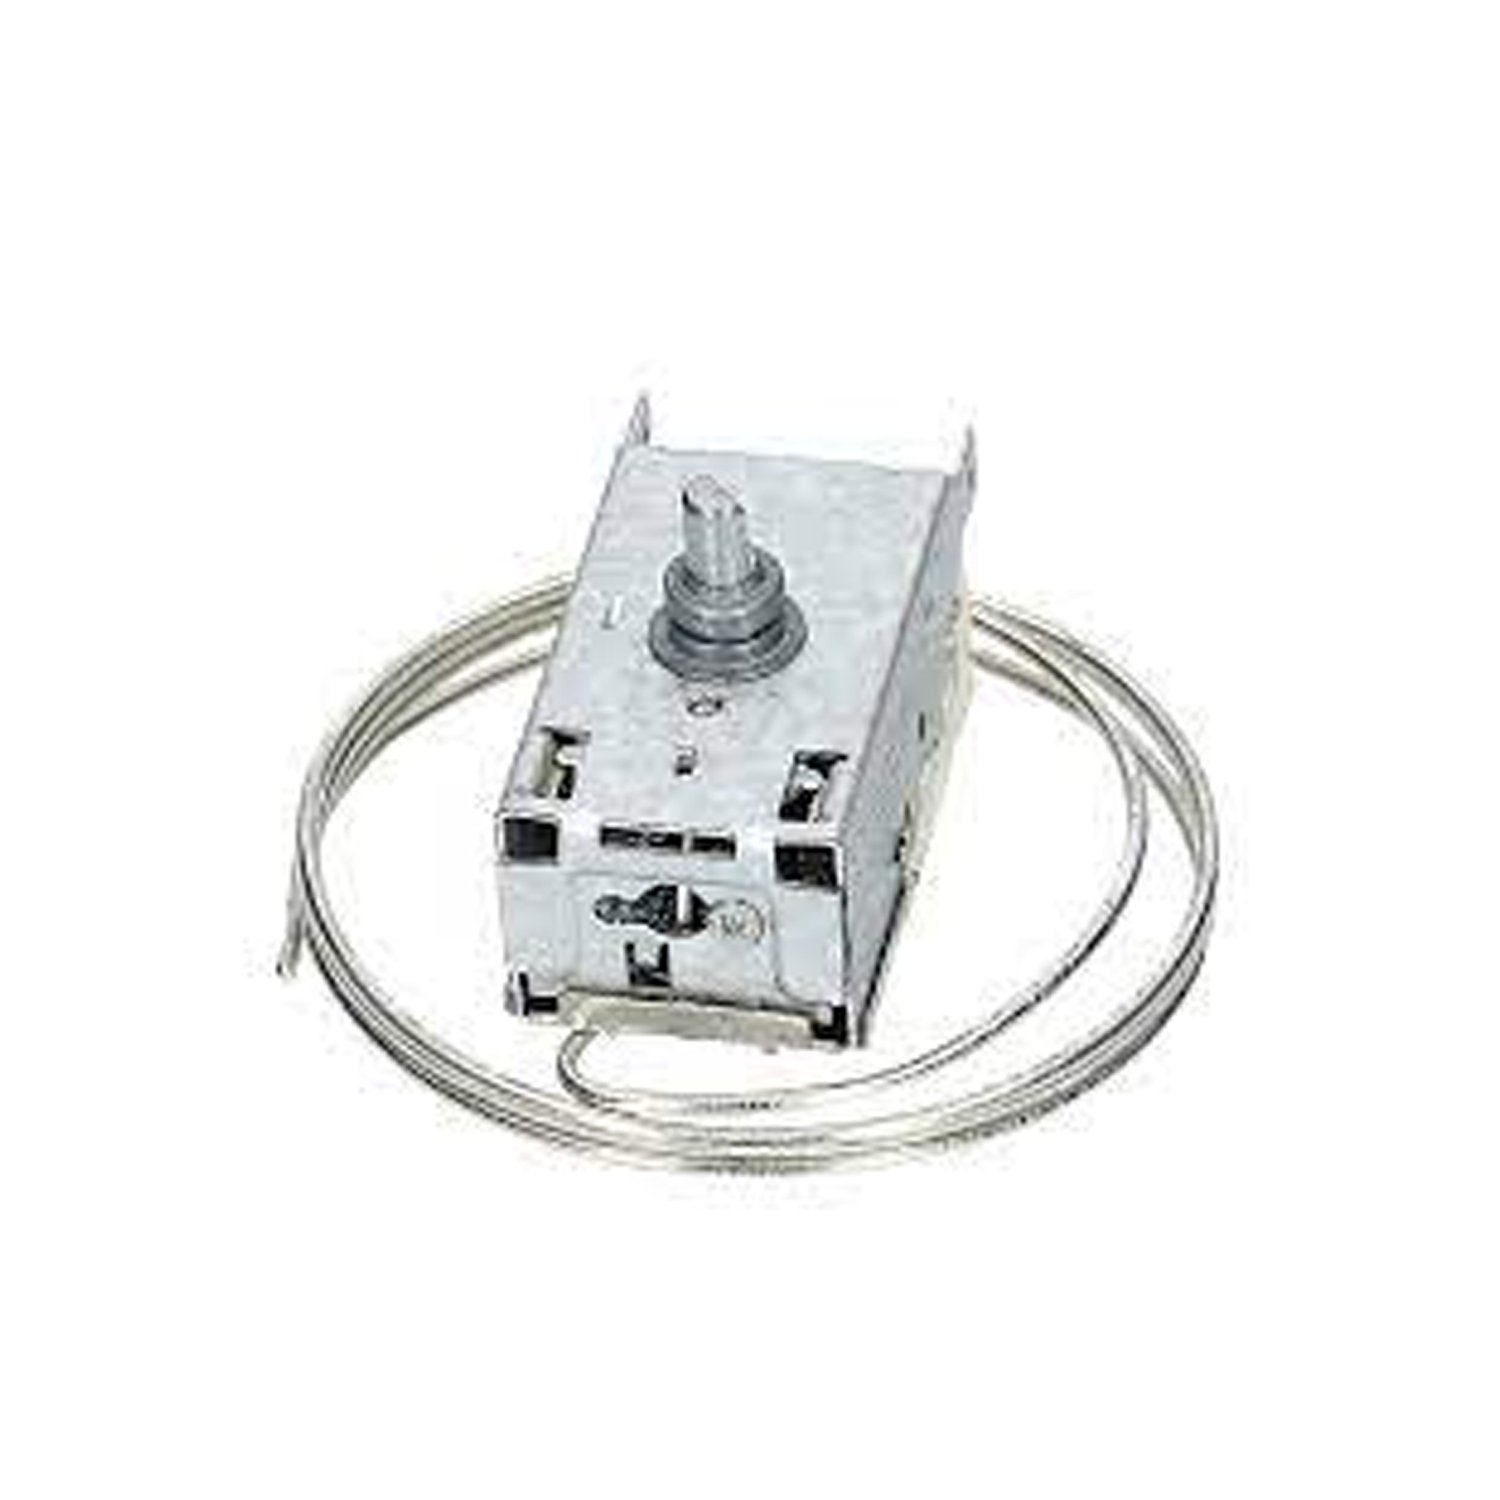 THERMOSTAT Atea A13 0704 for refrigerator WHIRLPOOL Alternative for Ranco K59-L1229/500, Jacuzzi 481228238179